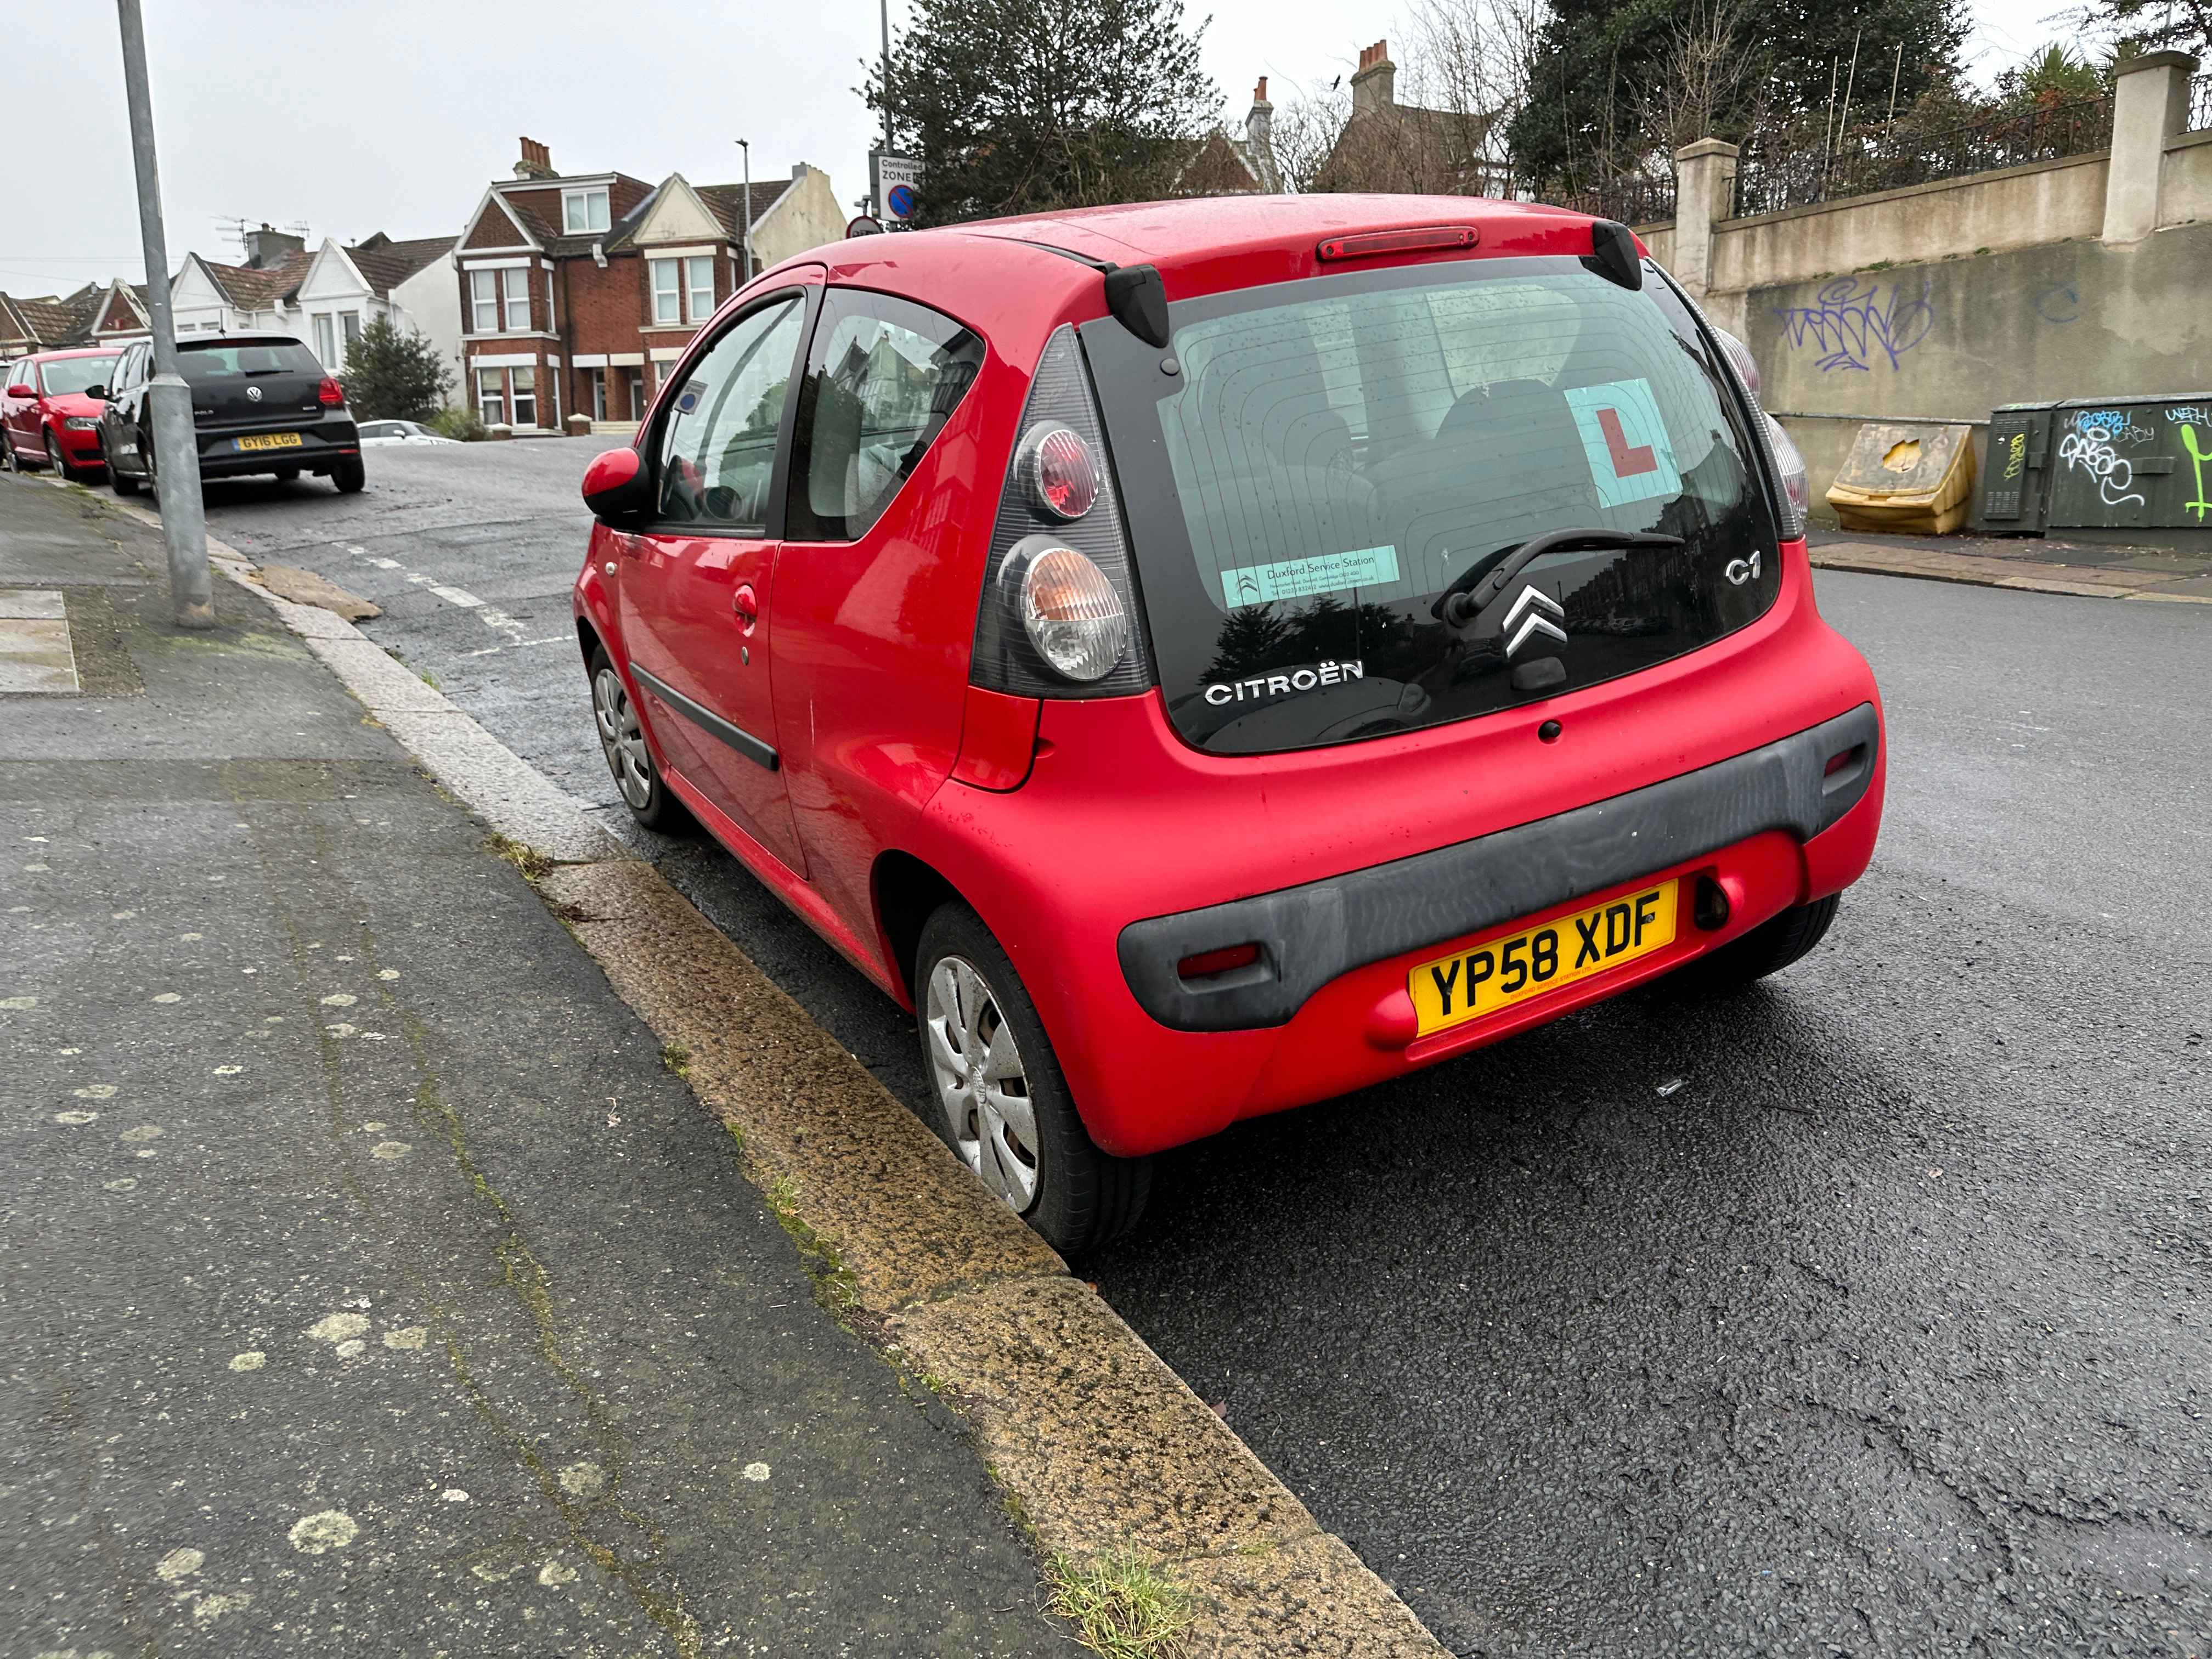 Photograph of YP58 XDF - a Red Citroen C1 parked in Hollingdean by a non-resident, and potentially abandoned. The fourth of five photographs supplied by the residents of Hollingdean.